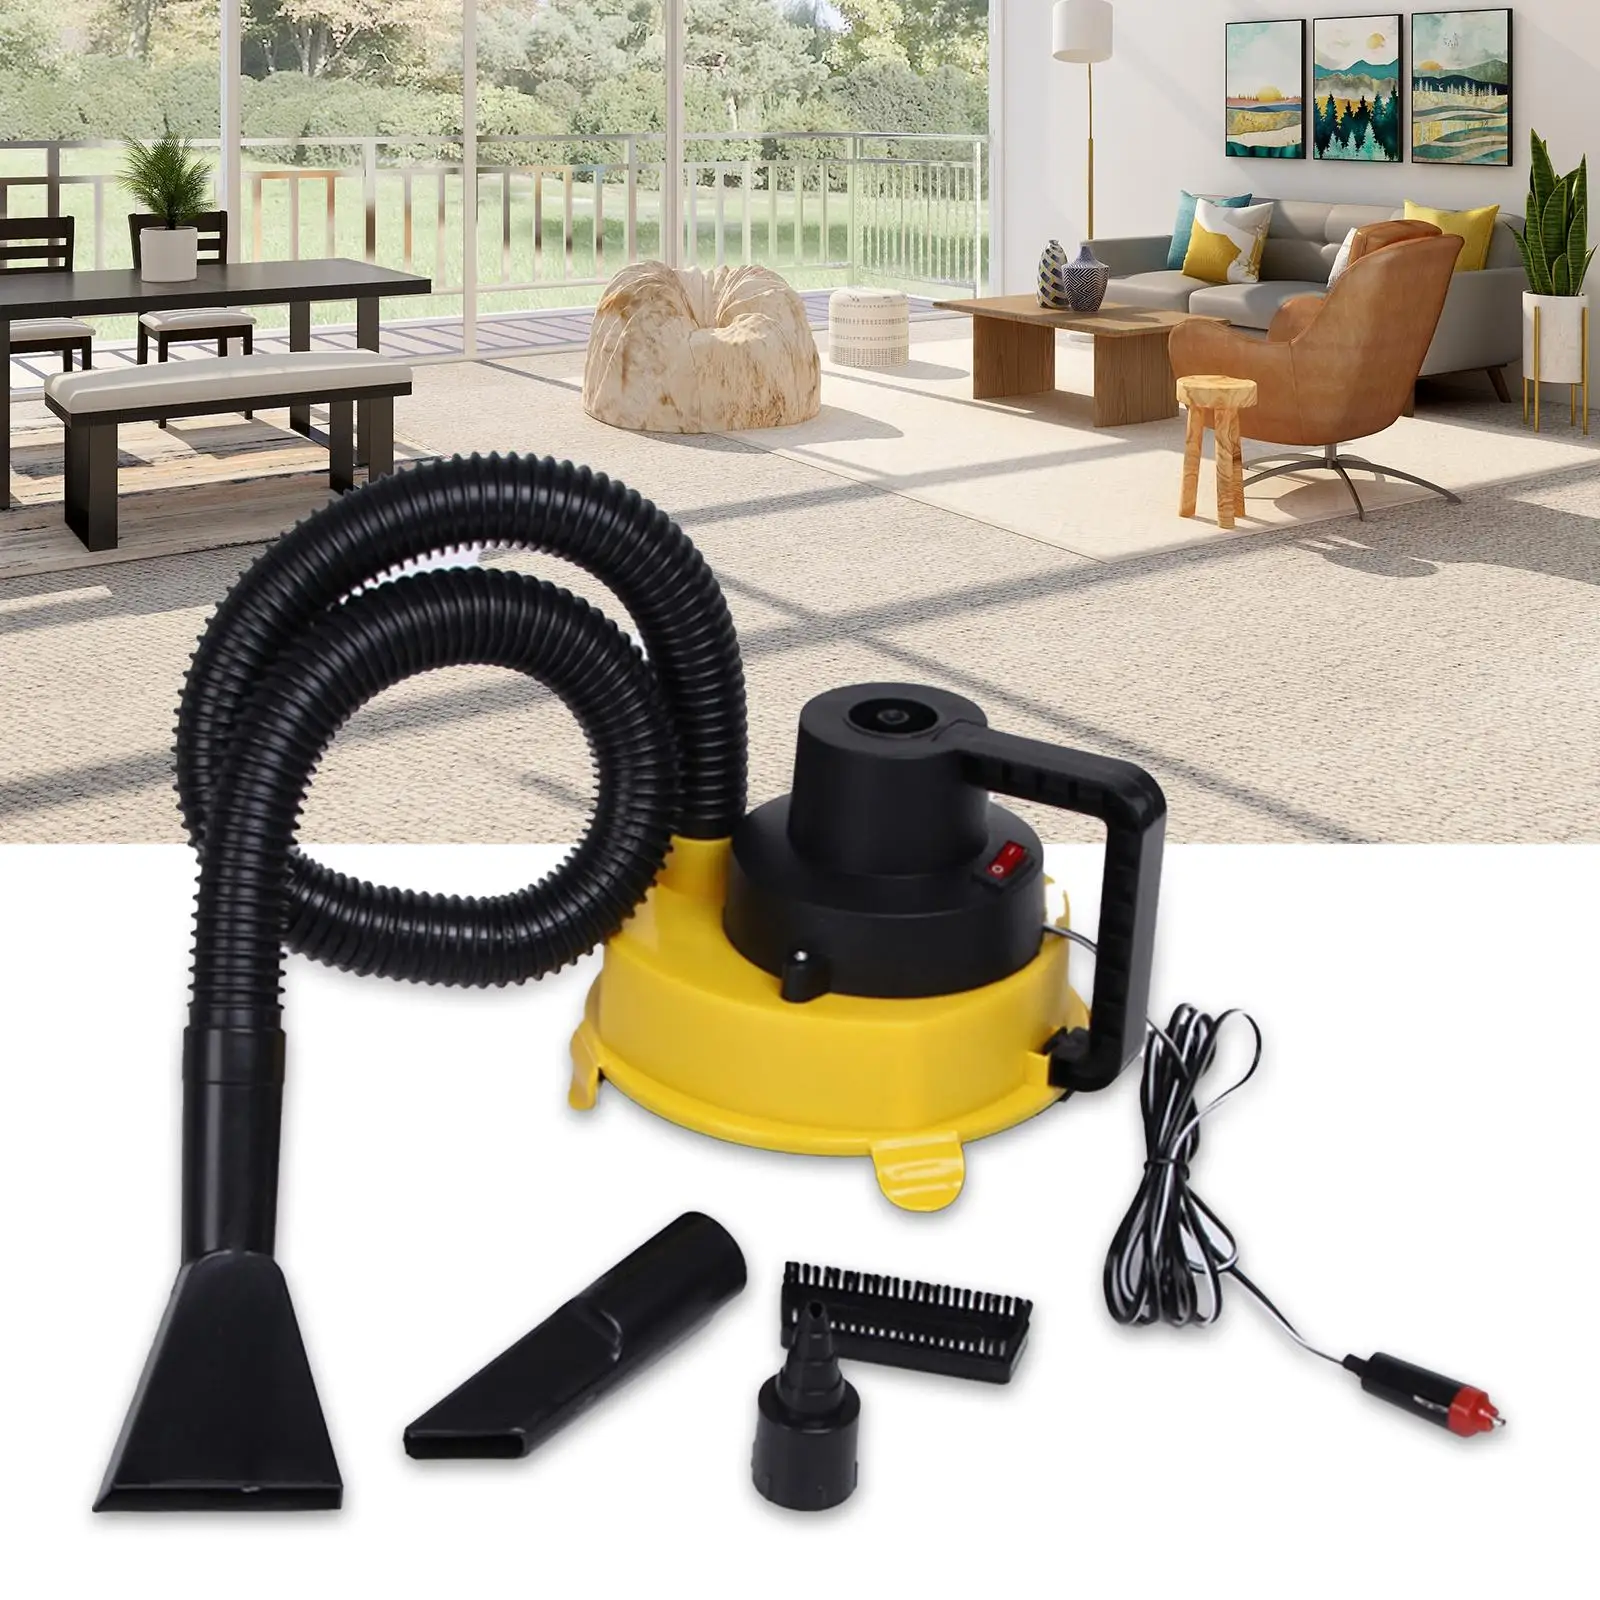 Car Vacuum Cleaner Wet Dry Vacuum Cleaner Washable 12V Lightweight Handheld Duster Dust Buster Auto Vacuum for Camper RV